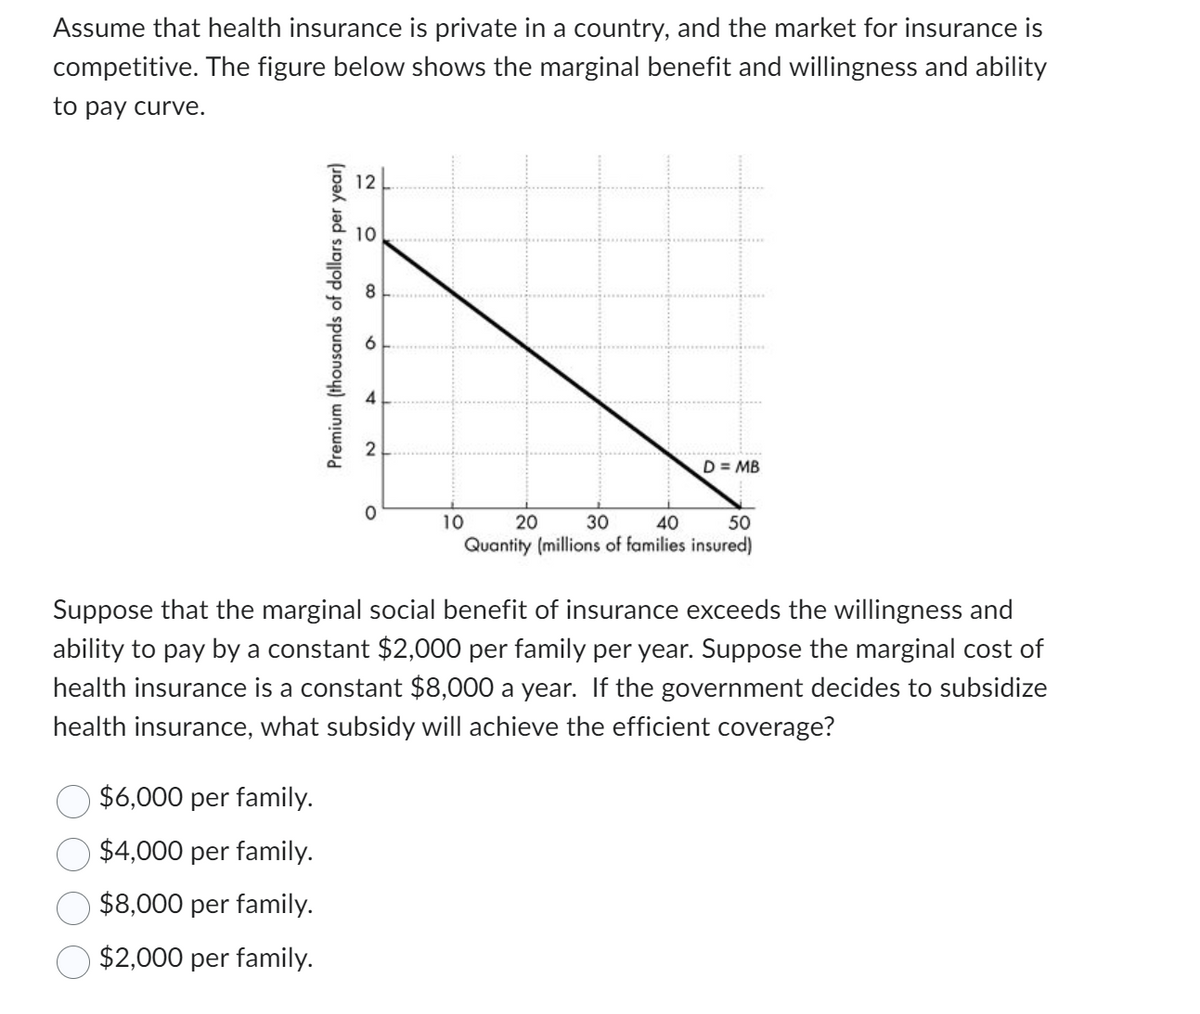 Assume that health insurance is private in a country, and the market for insurance is
competitive. The figure below shows the marginal benefit and willingness and ability
to pay curve.
Premium (thousands of dollars per year)
$6,000 per family.
$4,000 per family.
$8,000 per family.
$2,000 per family.
12
10
8
6
2
0
D = MB
10
20 30 40 50
Quantity (millions of families insured)
Suppose that the marginal social benefit of insurance exceeds the willingness and
ability to pay by a constant $2,000 per family per year. Suppose the marginal cost of
health insurance is a constant $8,000 a year. If the government decides to subsidize
health insurance, what subsidy will achieve the efficient coverage?